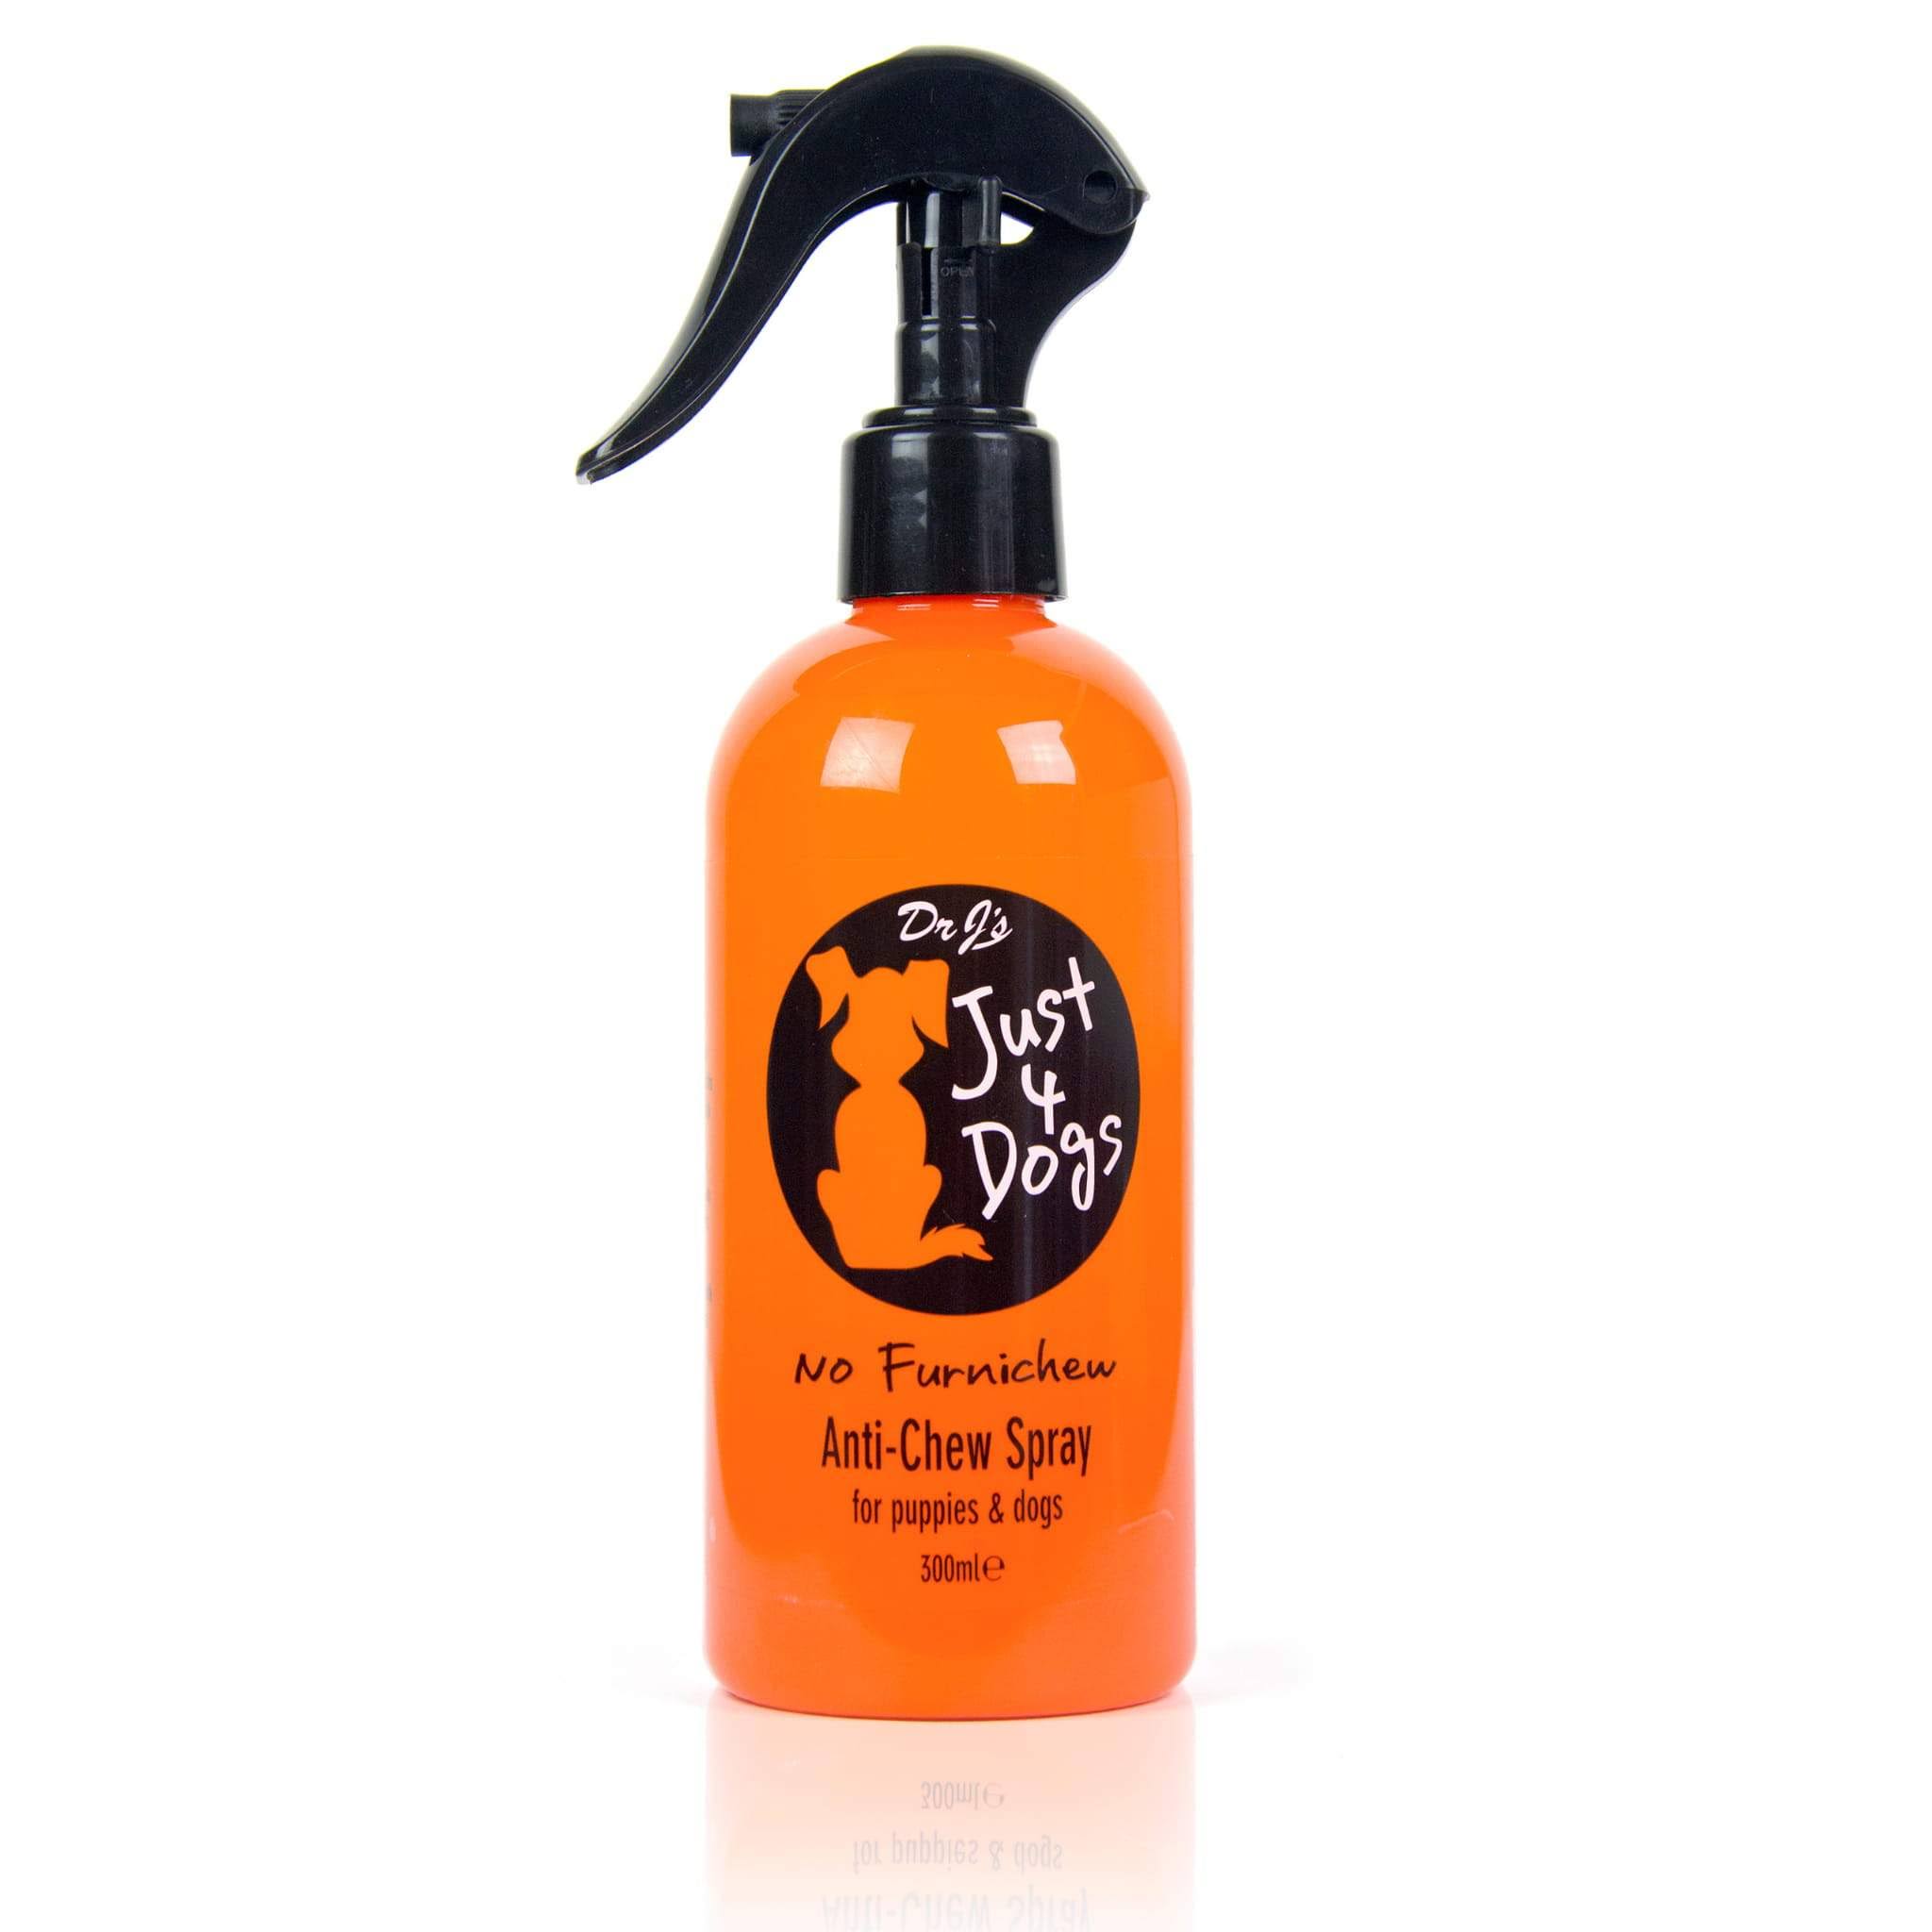 151 Products Just 4 Dogs Anti-Chew Spray 300ml - Case of 12